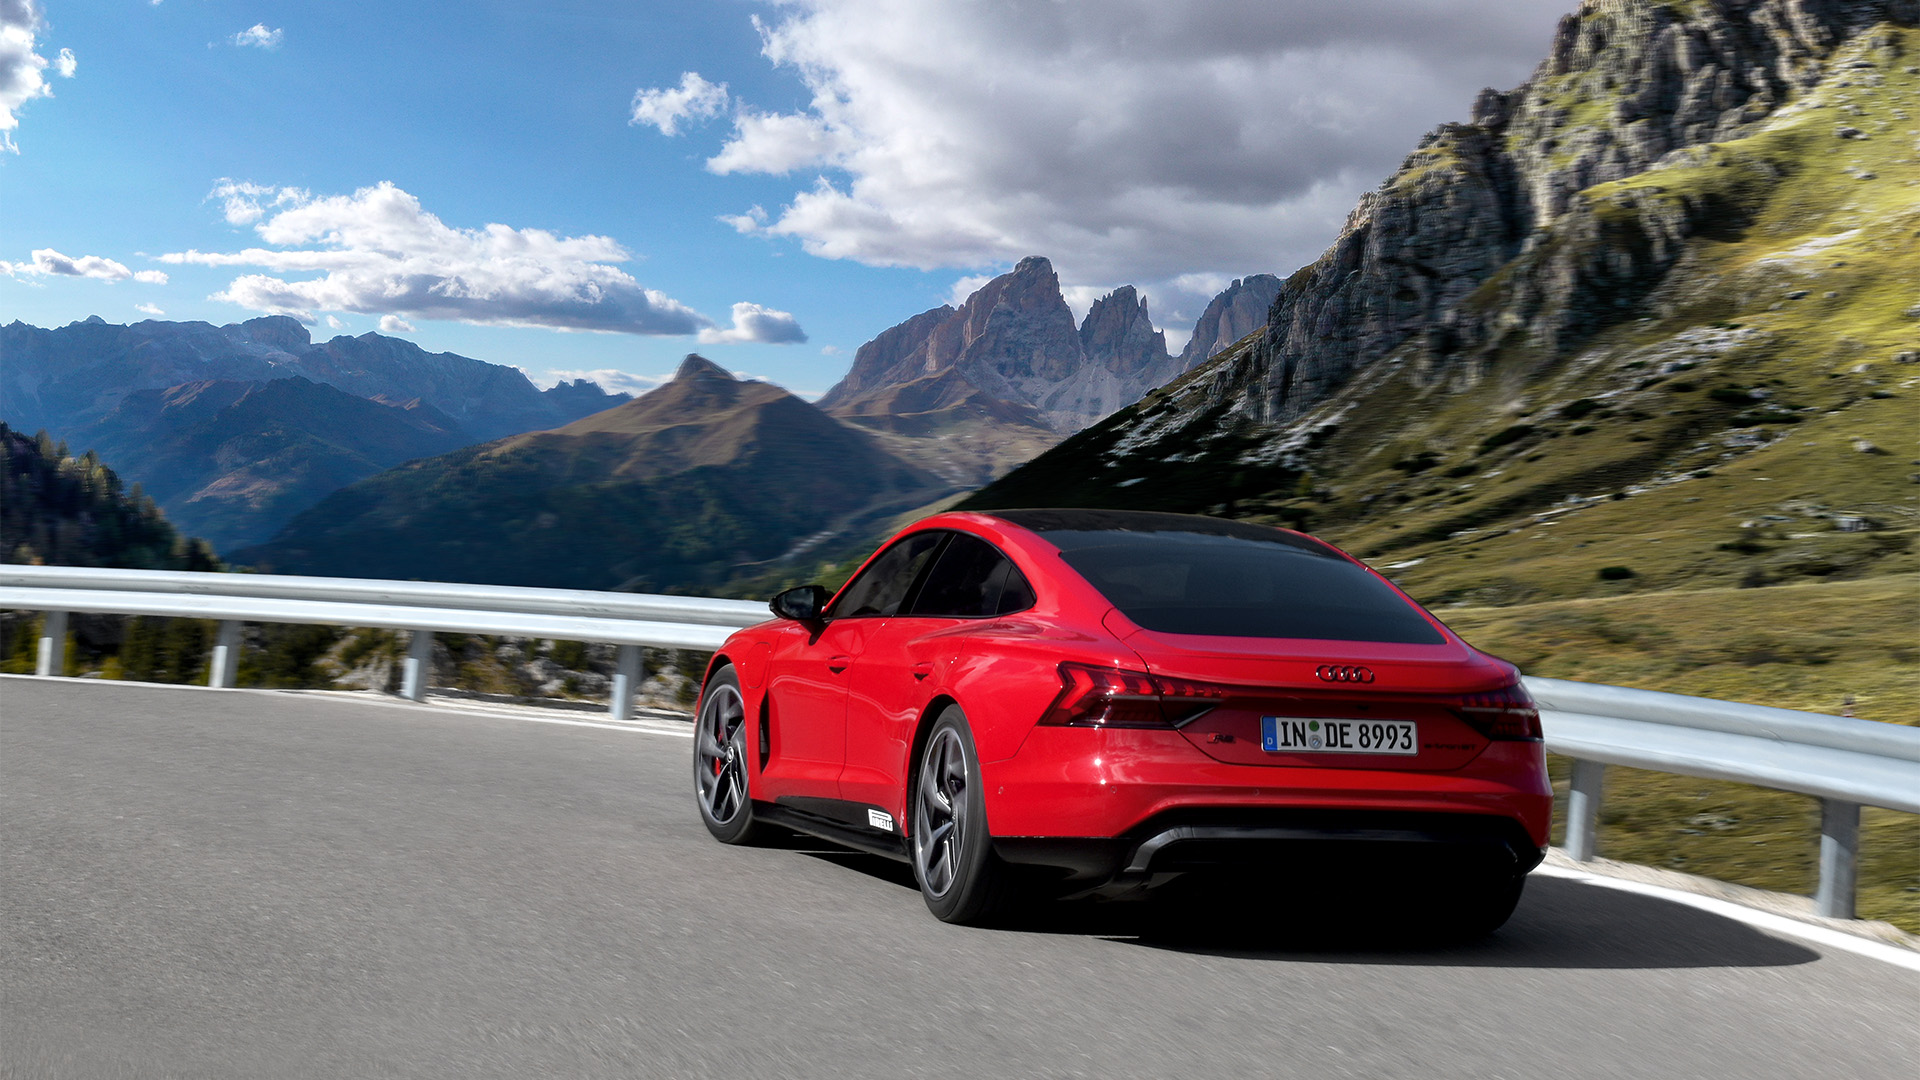 Red Audi RS e-tron GT drives through the mountains in great weather